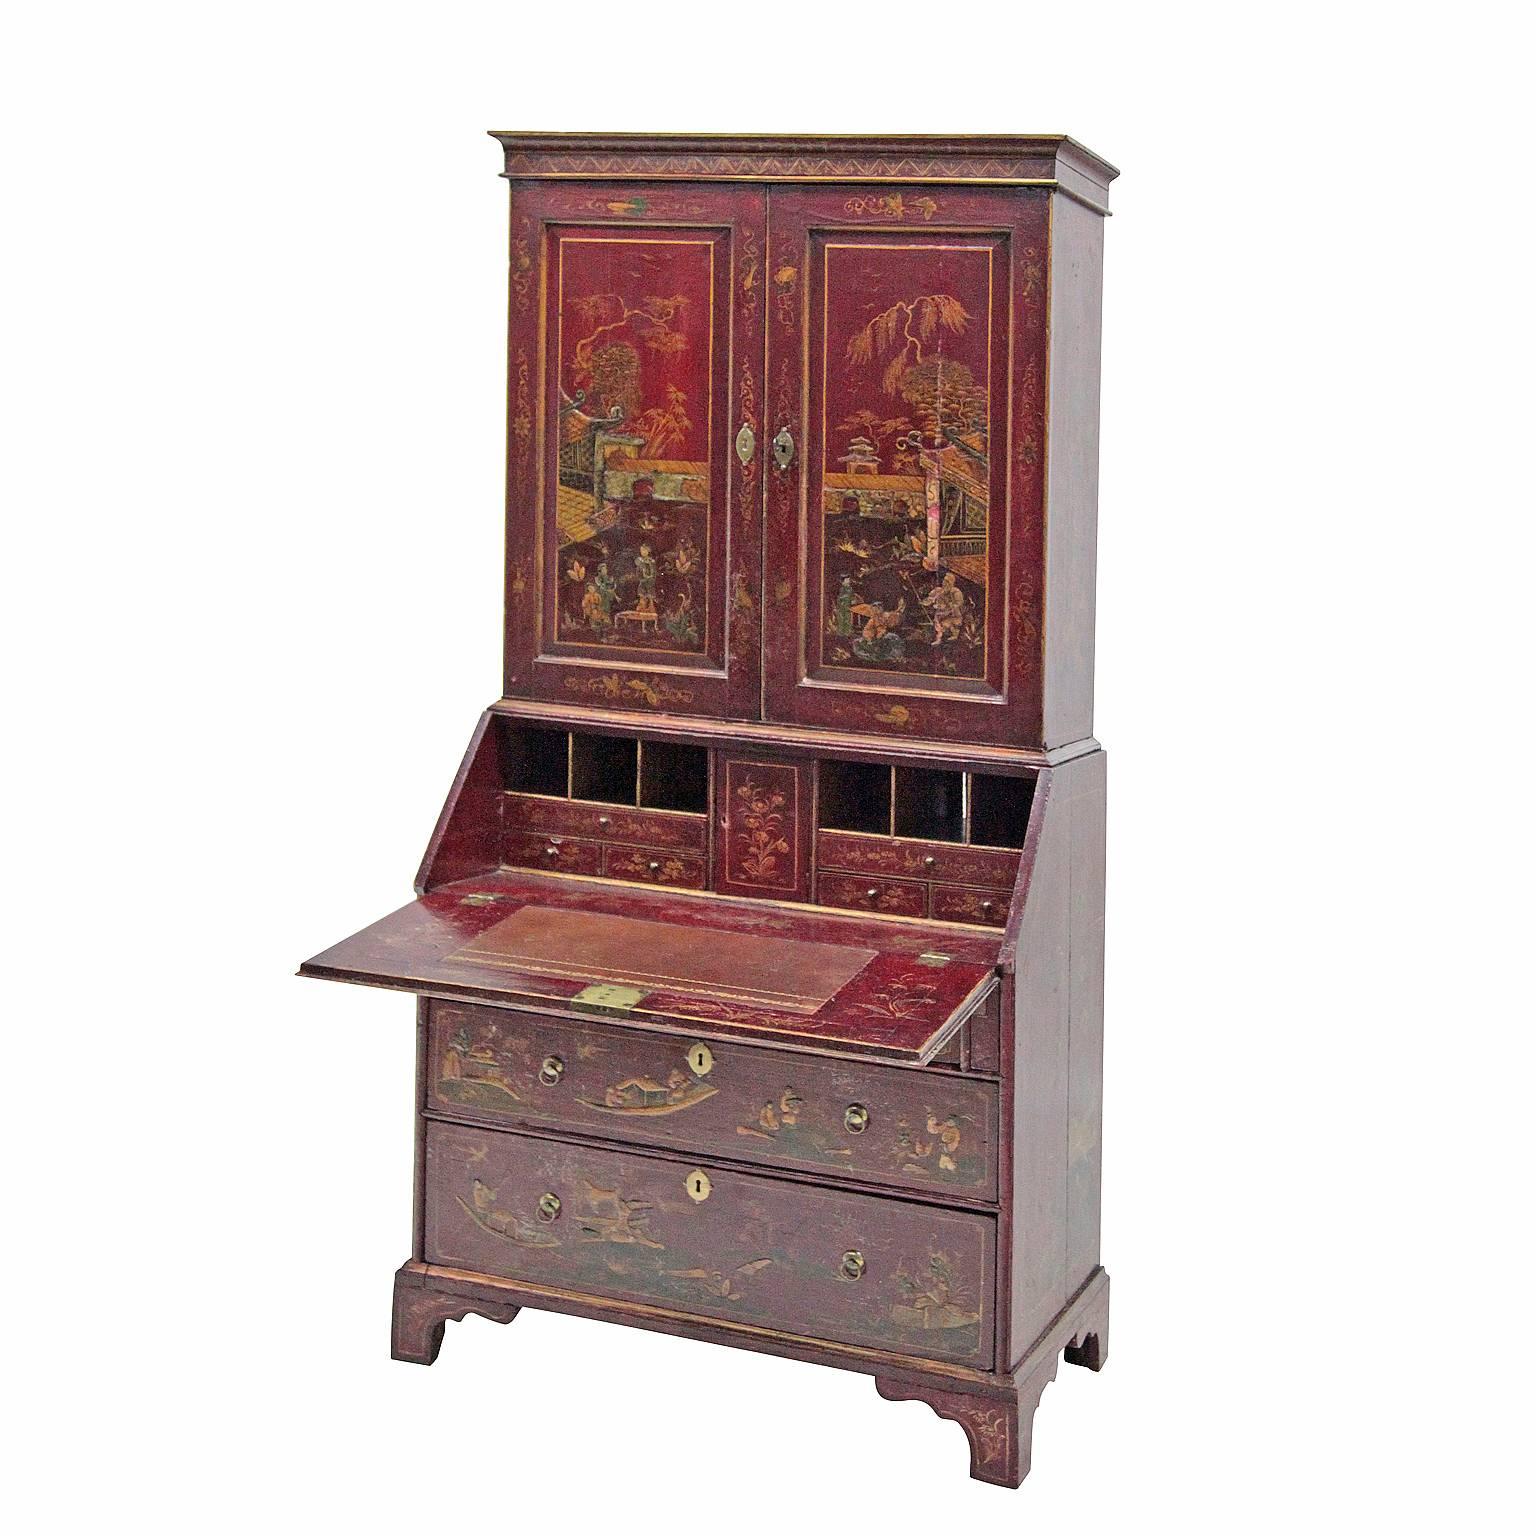 The lacquered Secretary Desk stands on four feet and is decorated with polychrome Chinese sceneries and has a chest of drawers lower part with four drawers. The writing surface is on a height of 76 cm and reveals several pigeon holes and drawers.